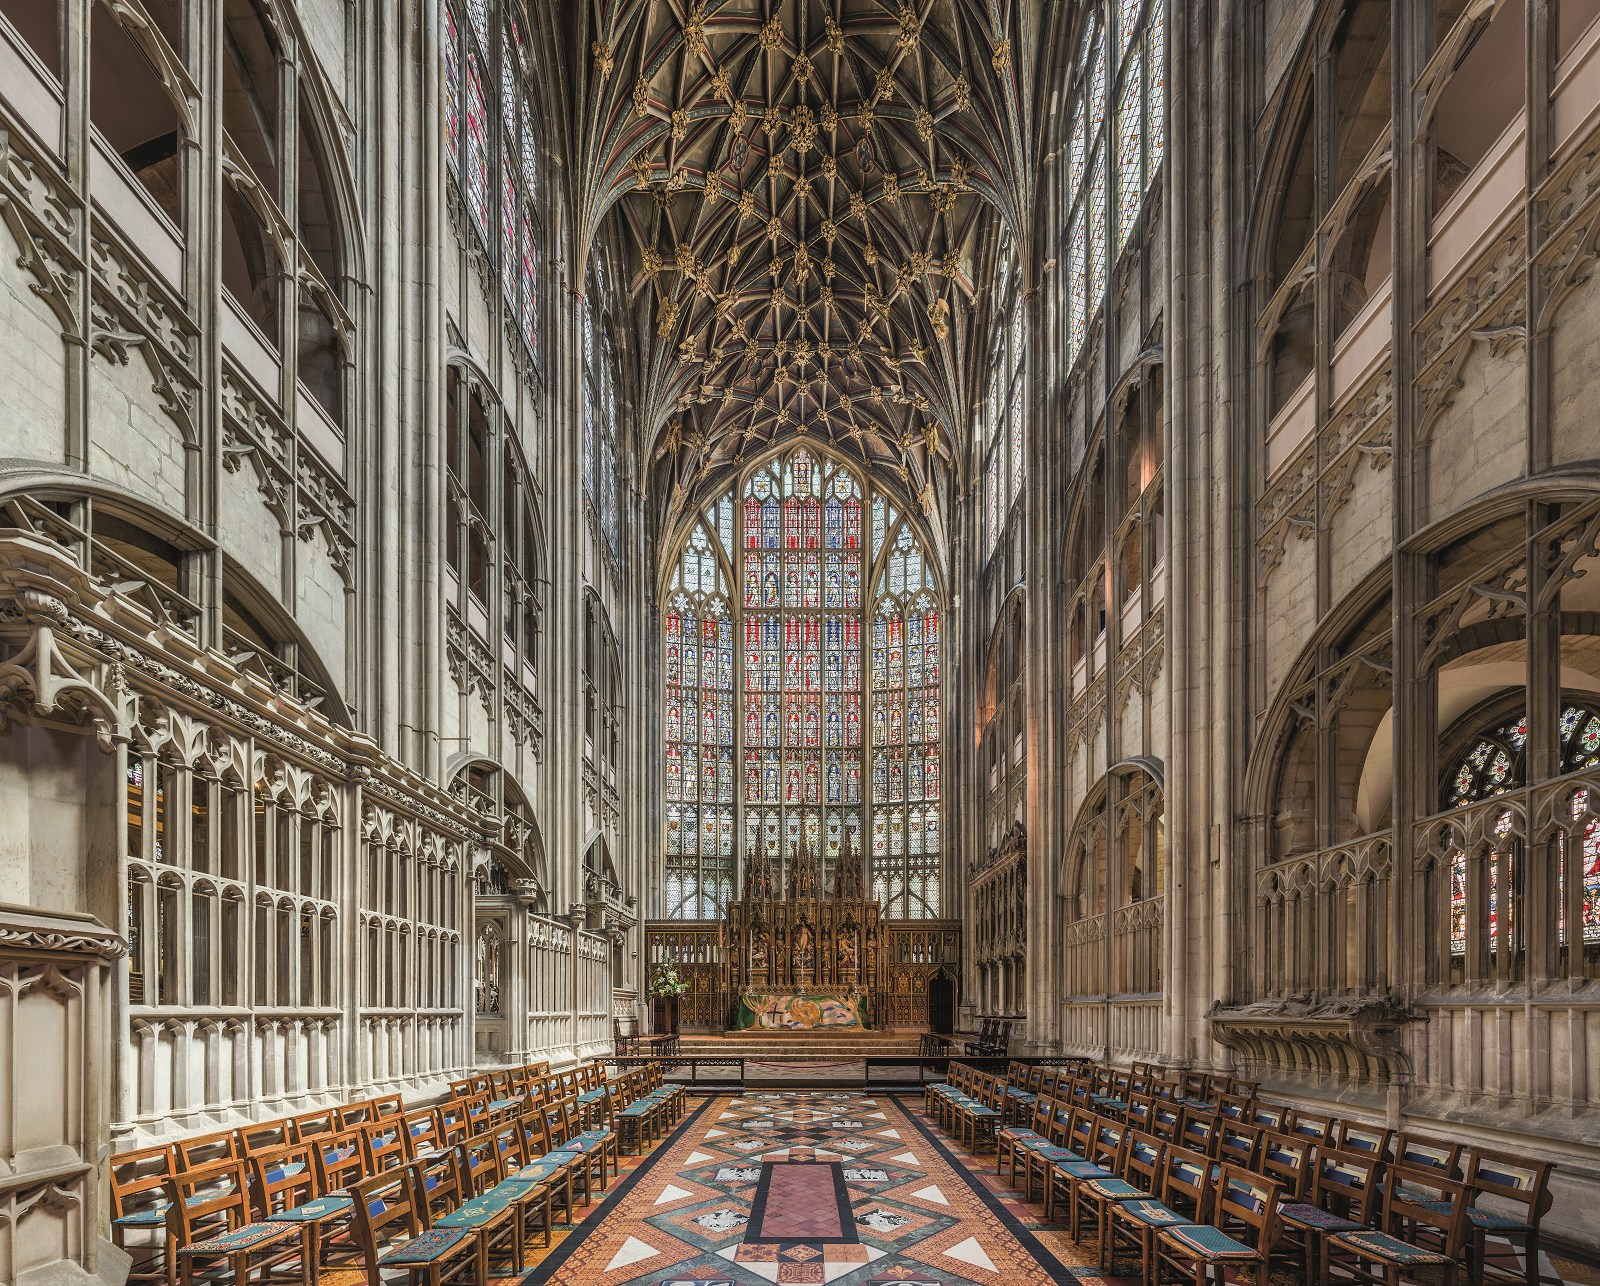 1. The awesome high altar and stained glass of Gloucester Cathedral. DAVID GILIFF CC BY-SA 3.0.